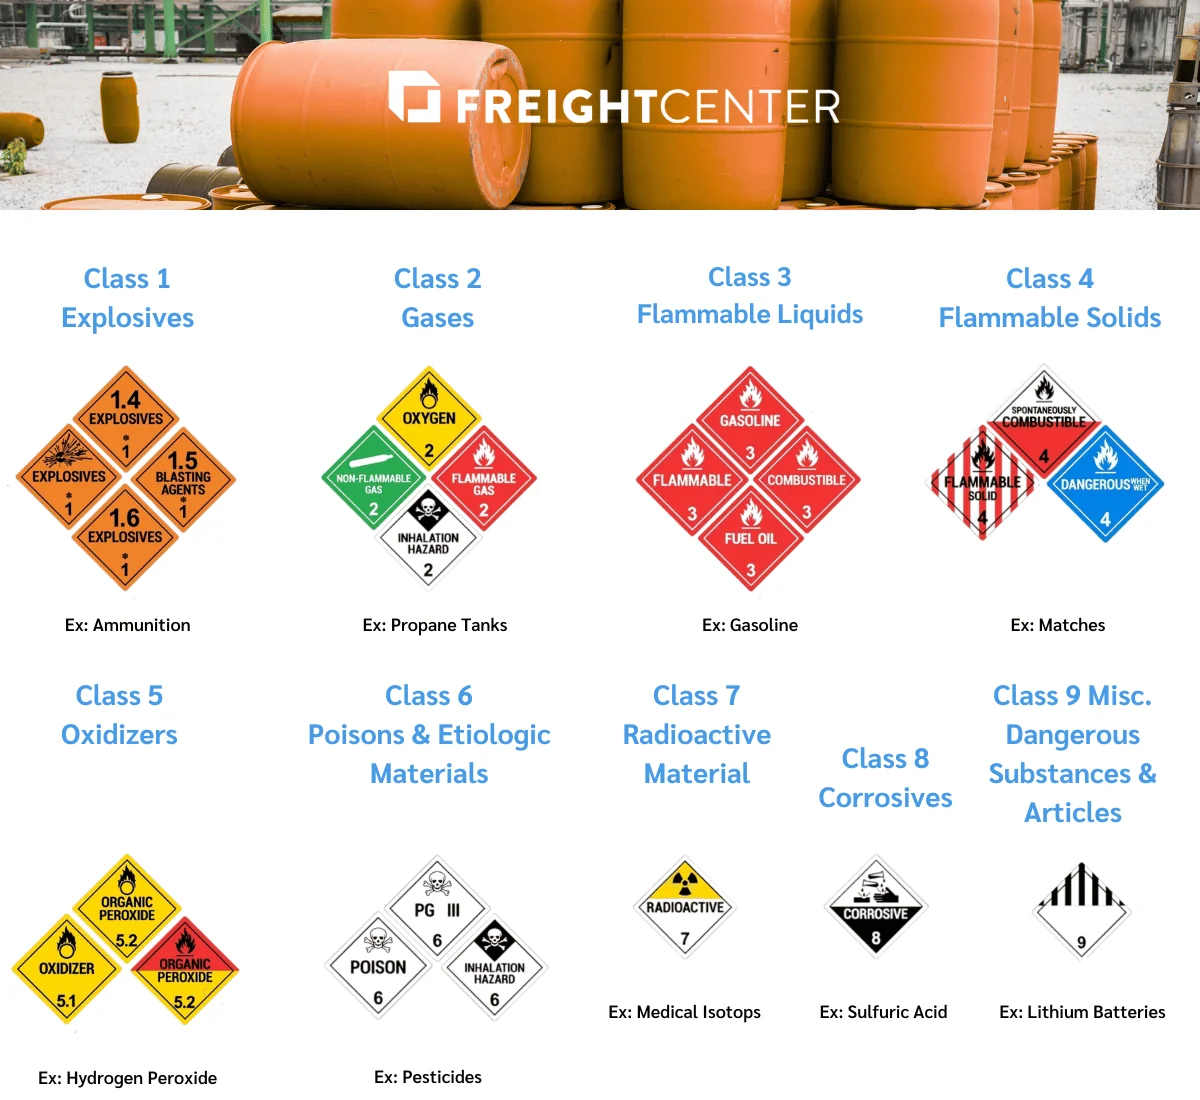 DOT hazard class definitions and examples